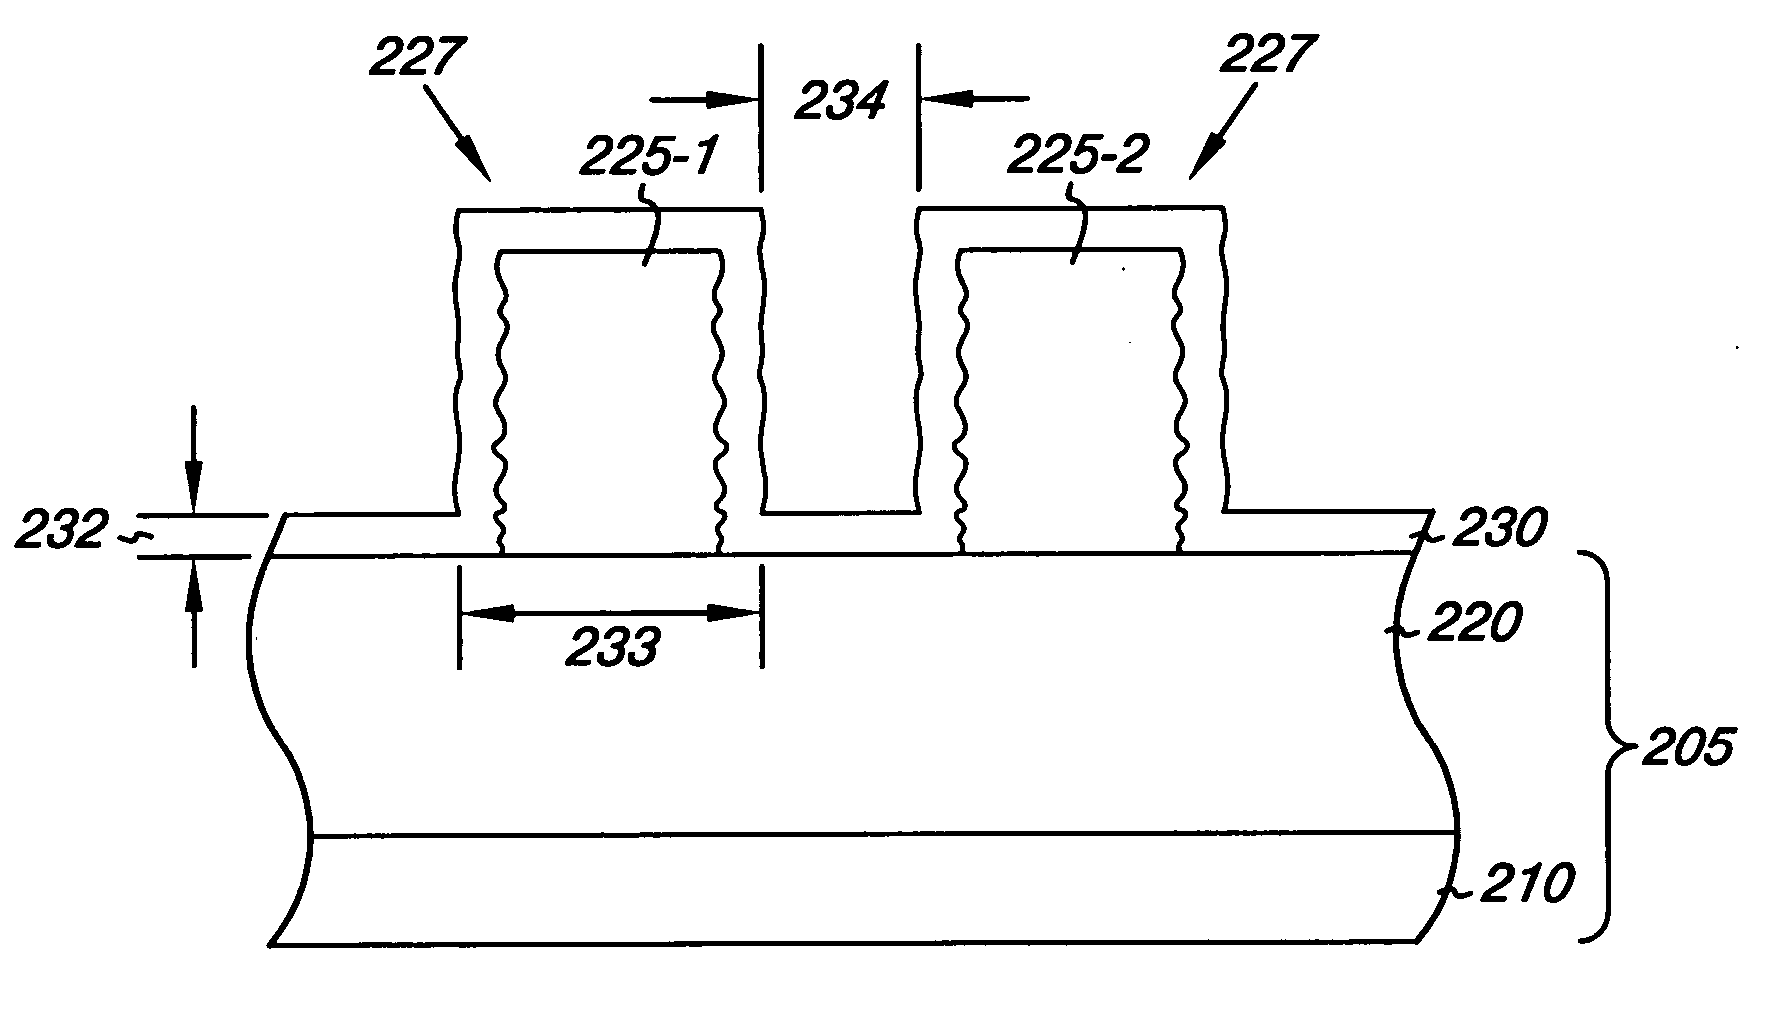 Line edge roughness reduction